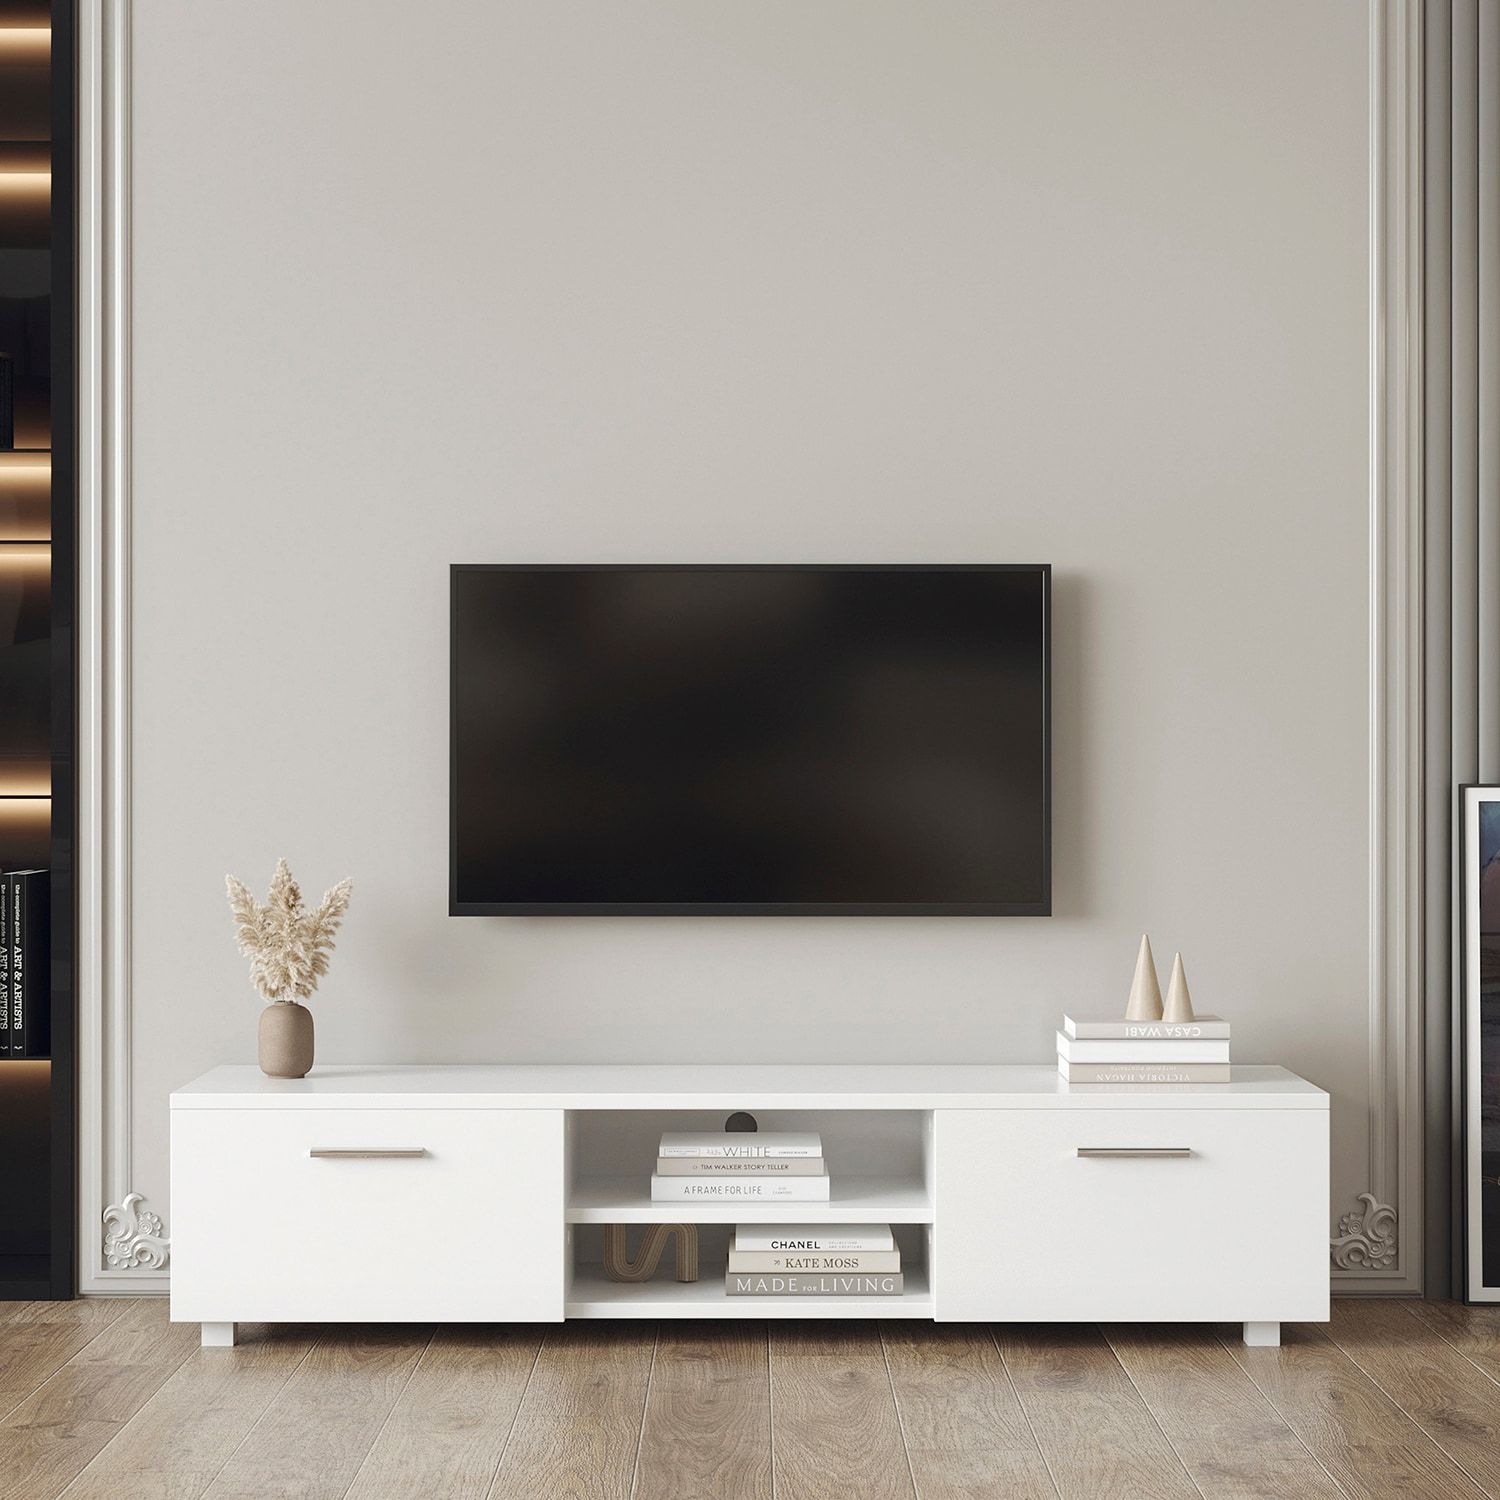 Gzmr White Tv Stand For 70 In Tv Stands Modern/Contemporary White Tv Cabinet  (Accommodates Tvs Up To 70 In) In The Tv Stands Department At Lowes Regarding White Tv Stands Entertainment Center (View 12 of 15)